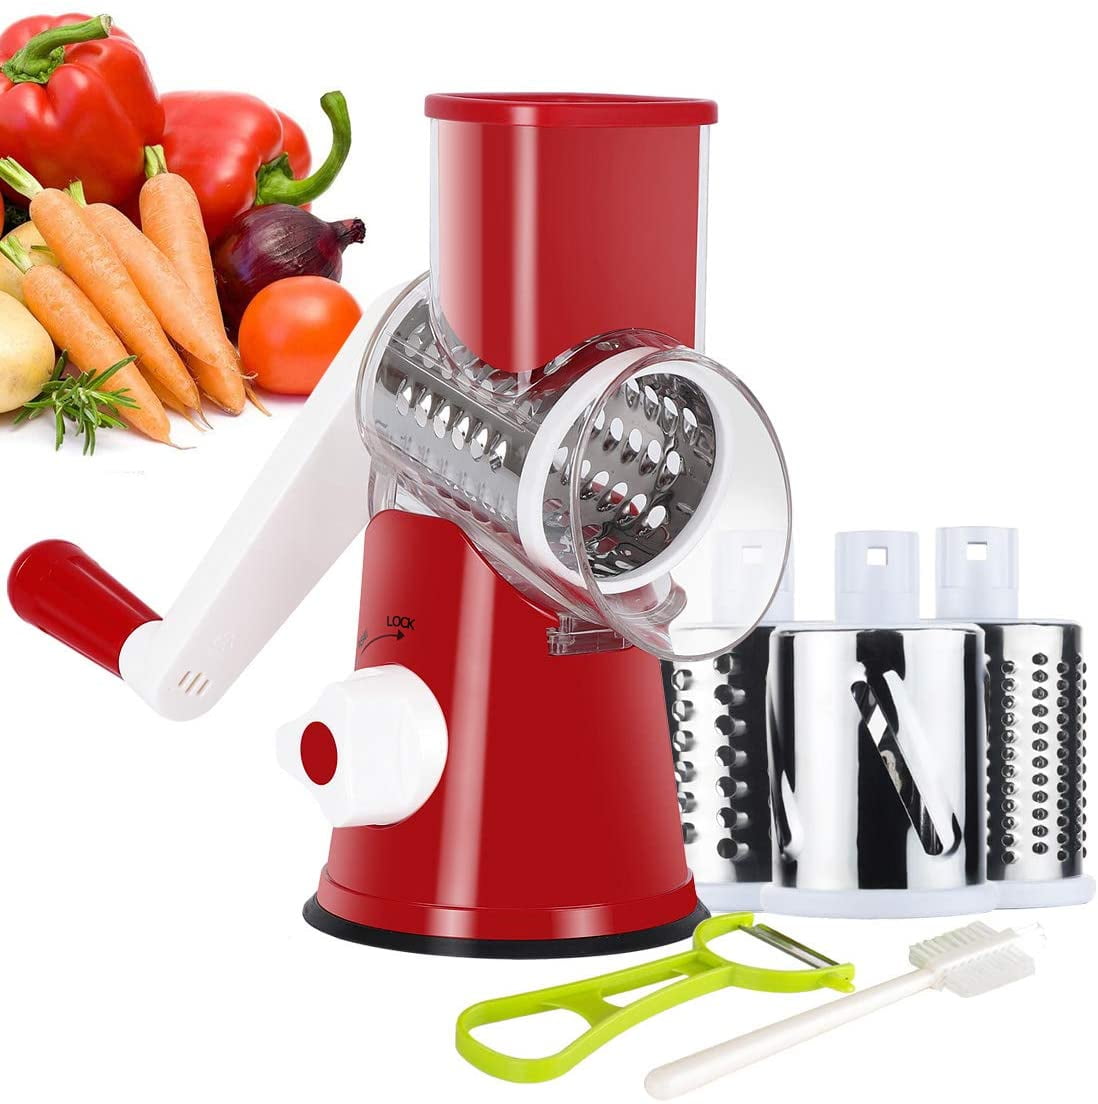  Ourokhome Manual Food Processor with Cheese Grater Zester for  Lemon, Vegetable, Ginger, Garlic, Onion: Home & Kitchen